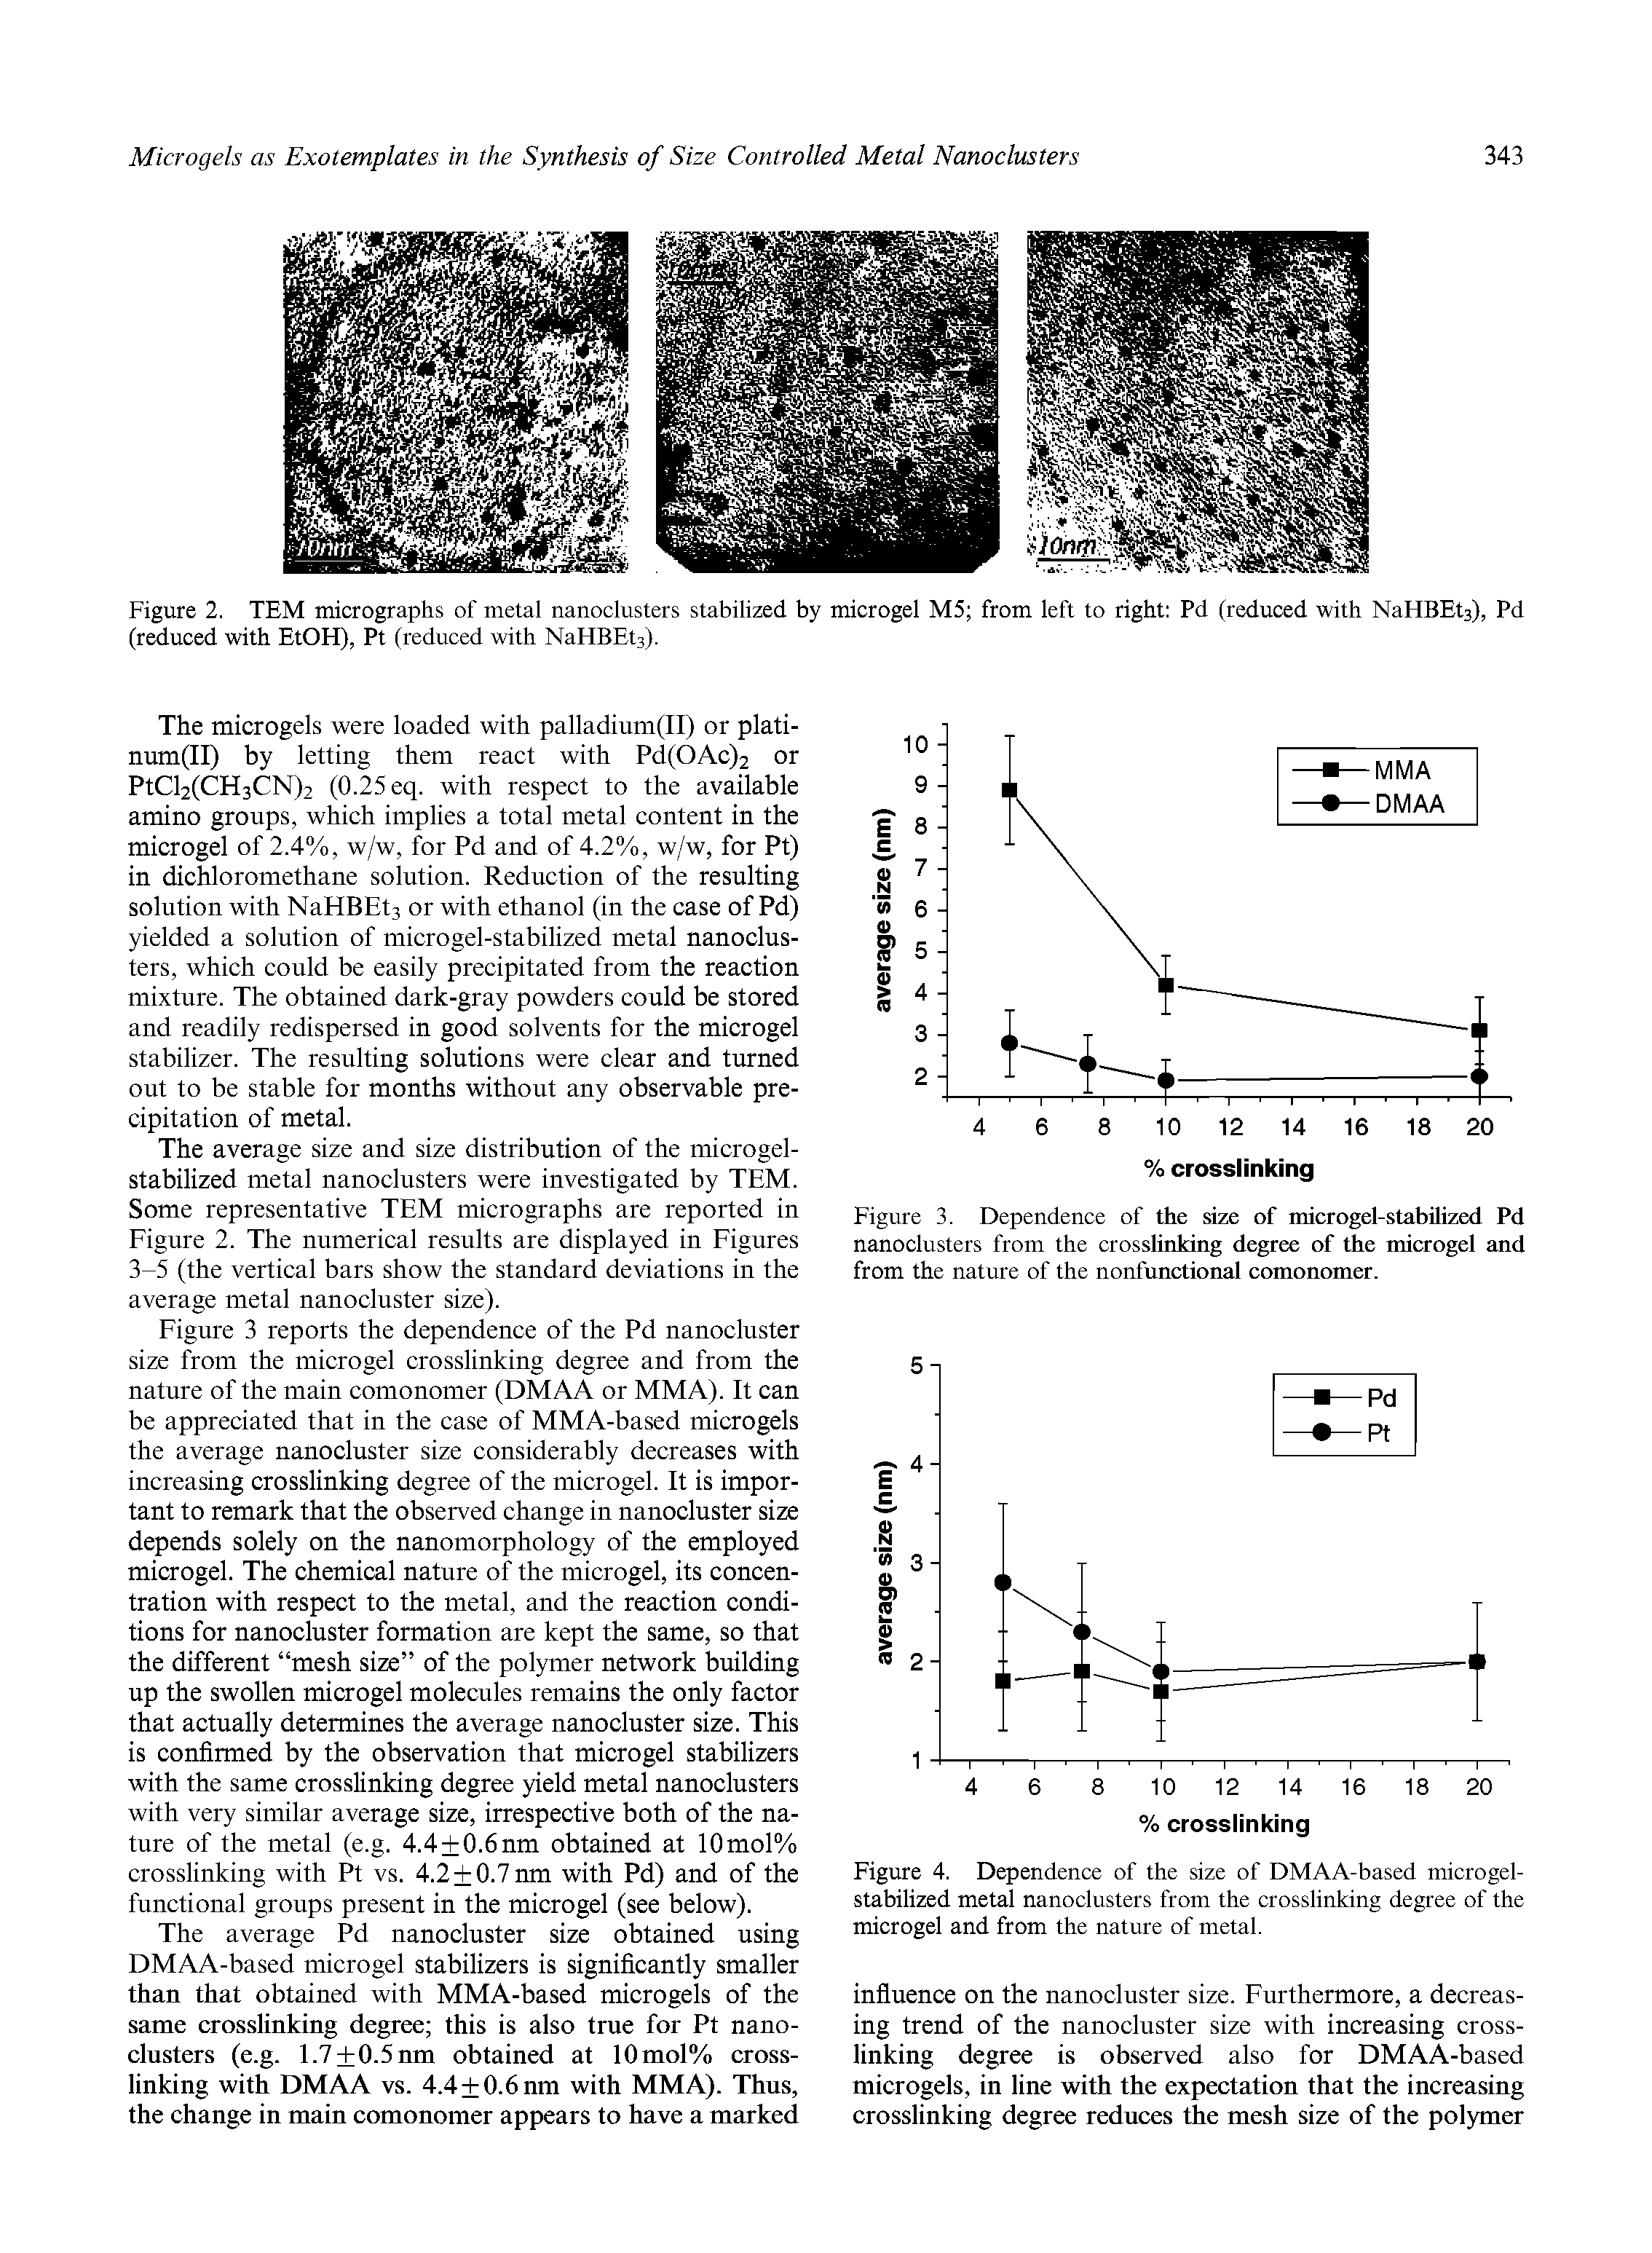 Figure 3. Dependence of the size of microgel-stabilized Pd nanoclusters from the crosslinking degree of the microgel and from the nature of the nonfunctional comonomer.